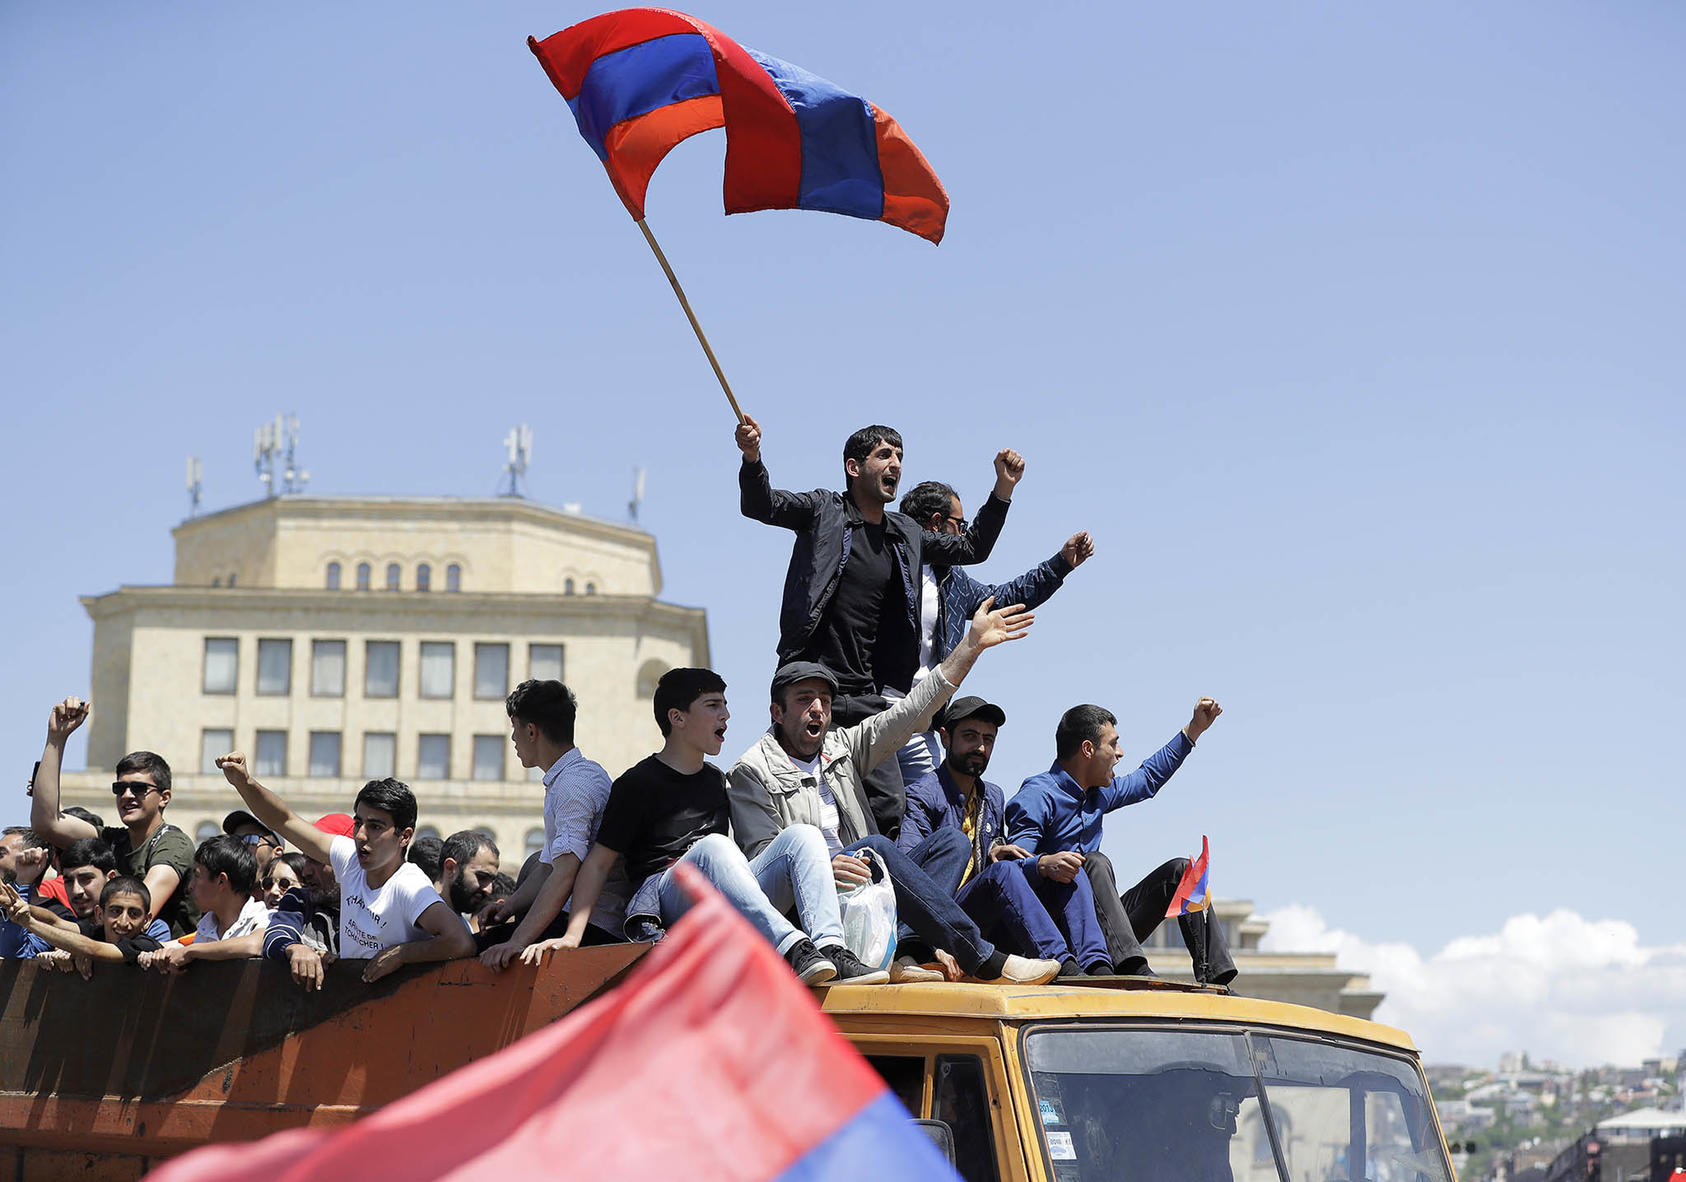 Supporters of opposition leader Nikol Pashinyan protest in Republic Square in Yerevan, Armenia, on May 2, 2018. (Photo by Sergei Grits/AP)